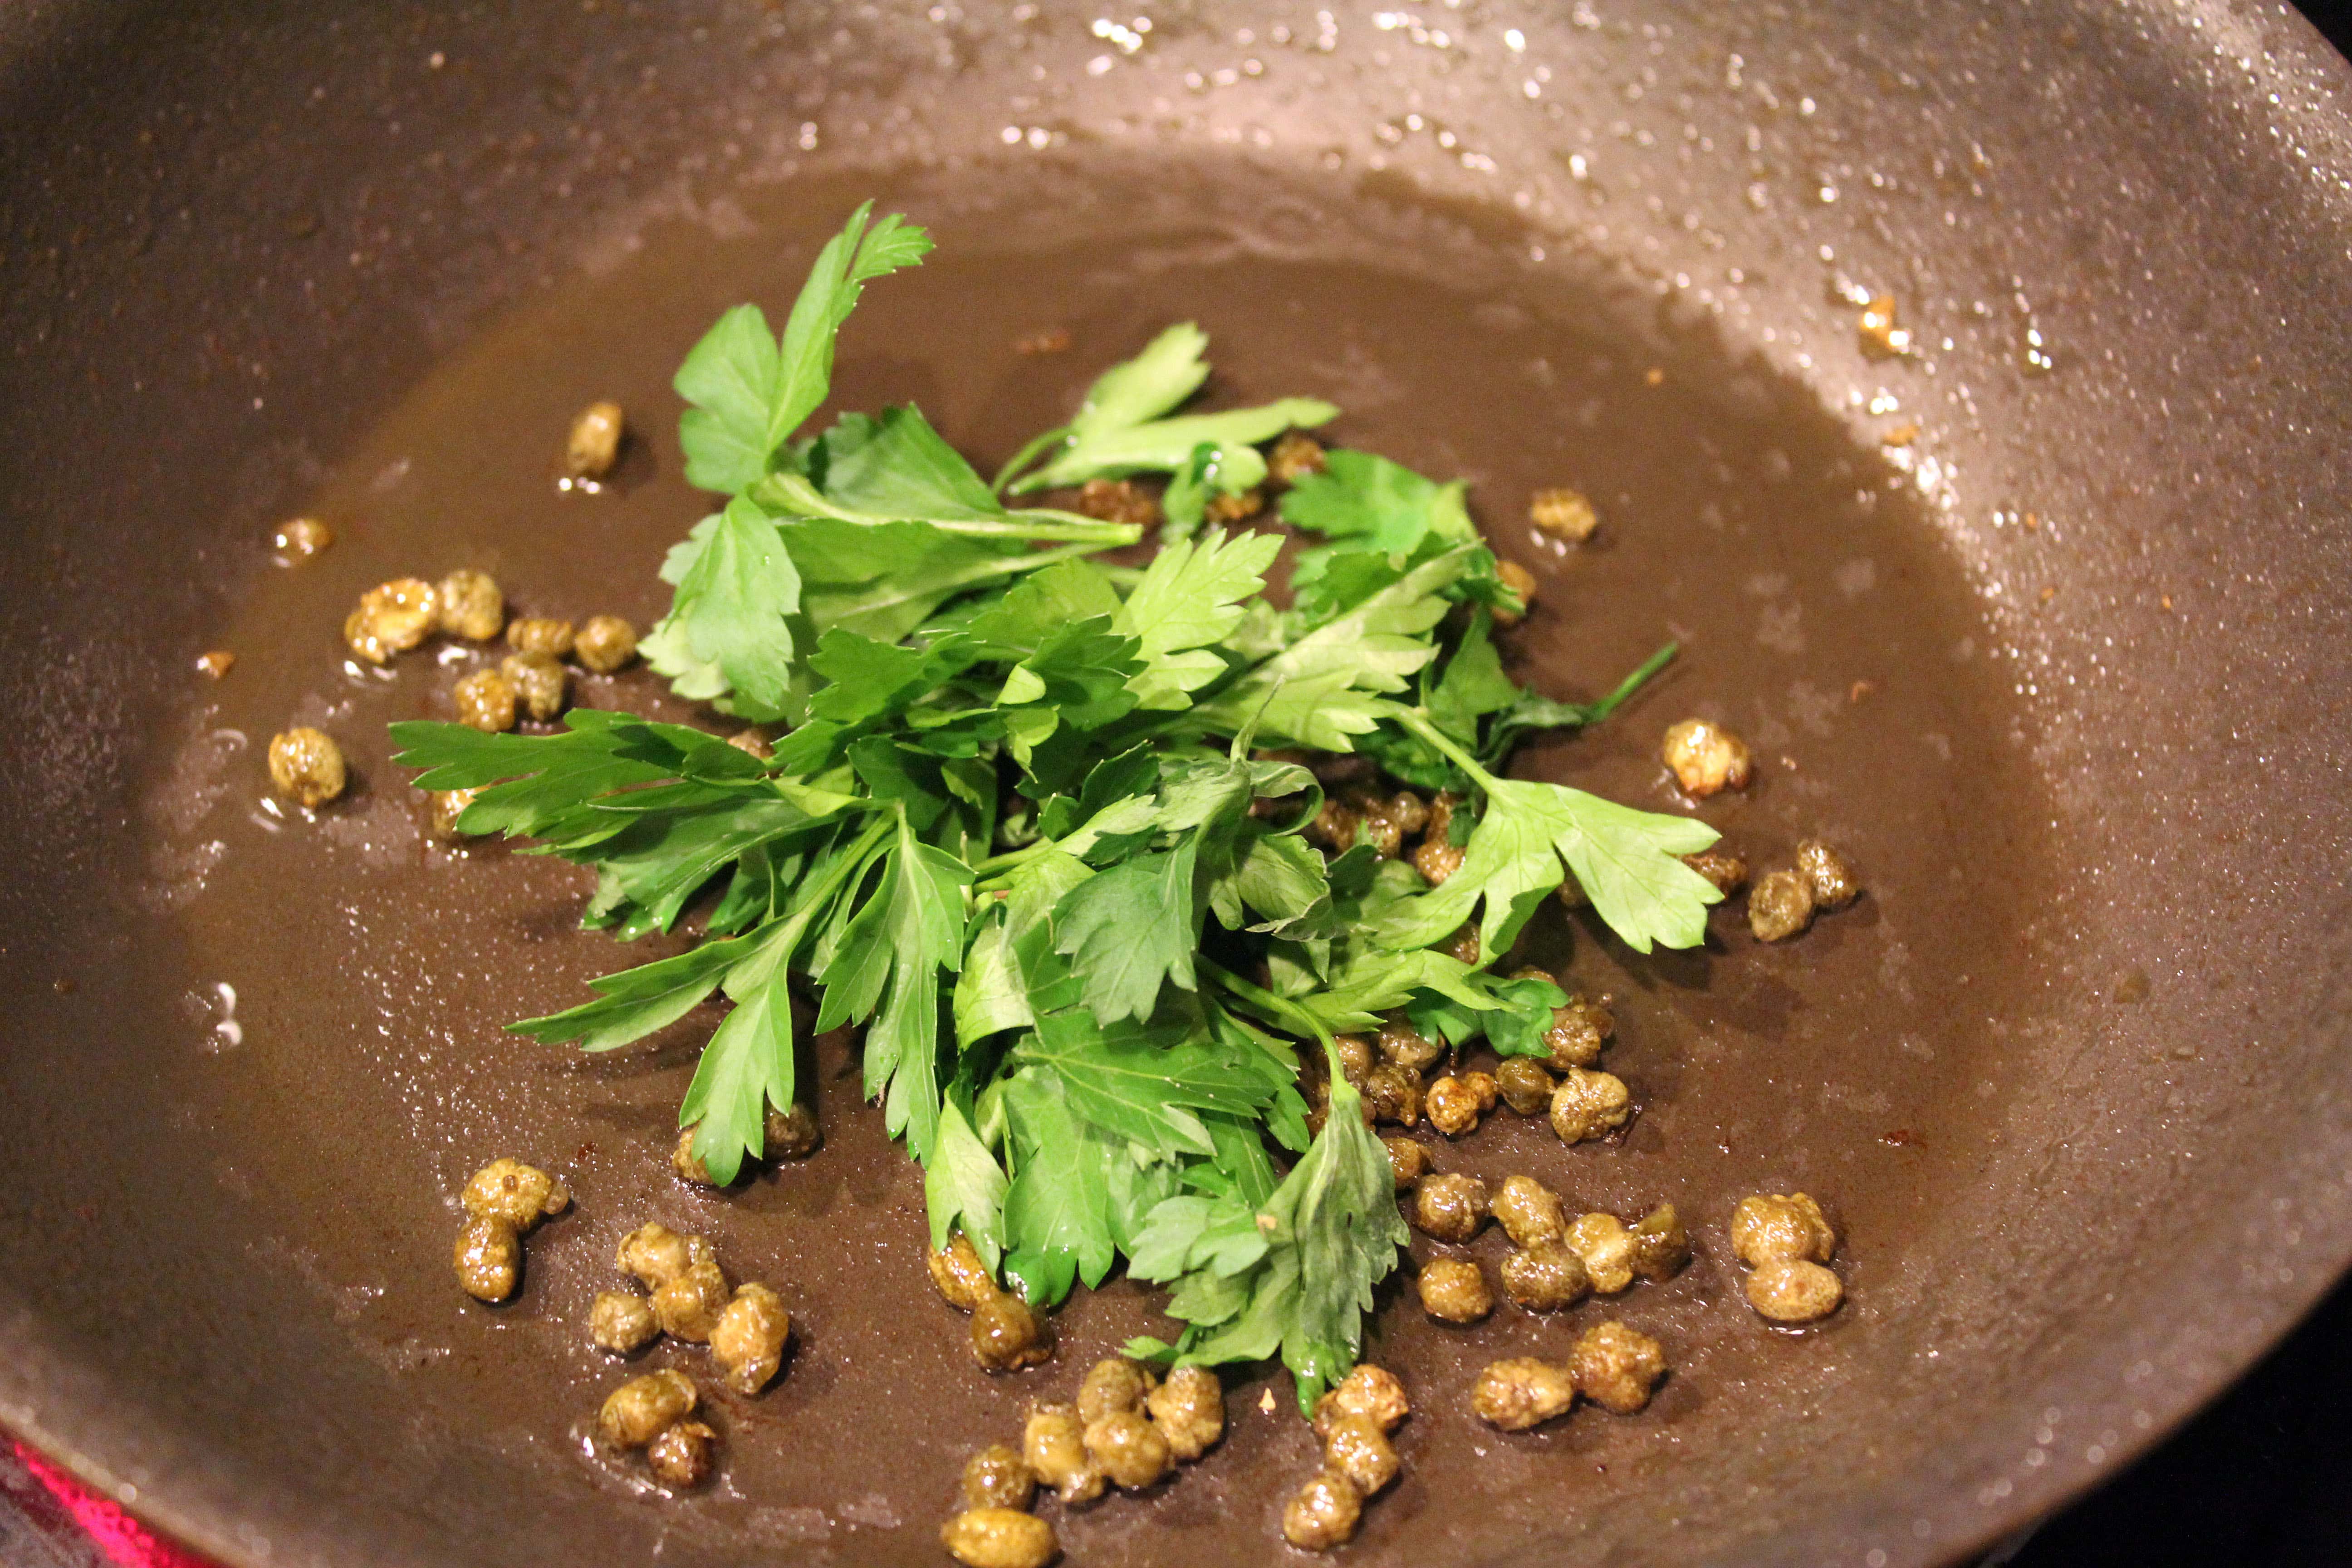 Add parsley to crispy capers